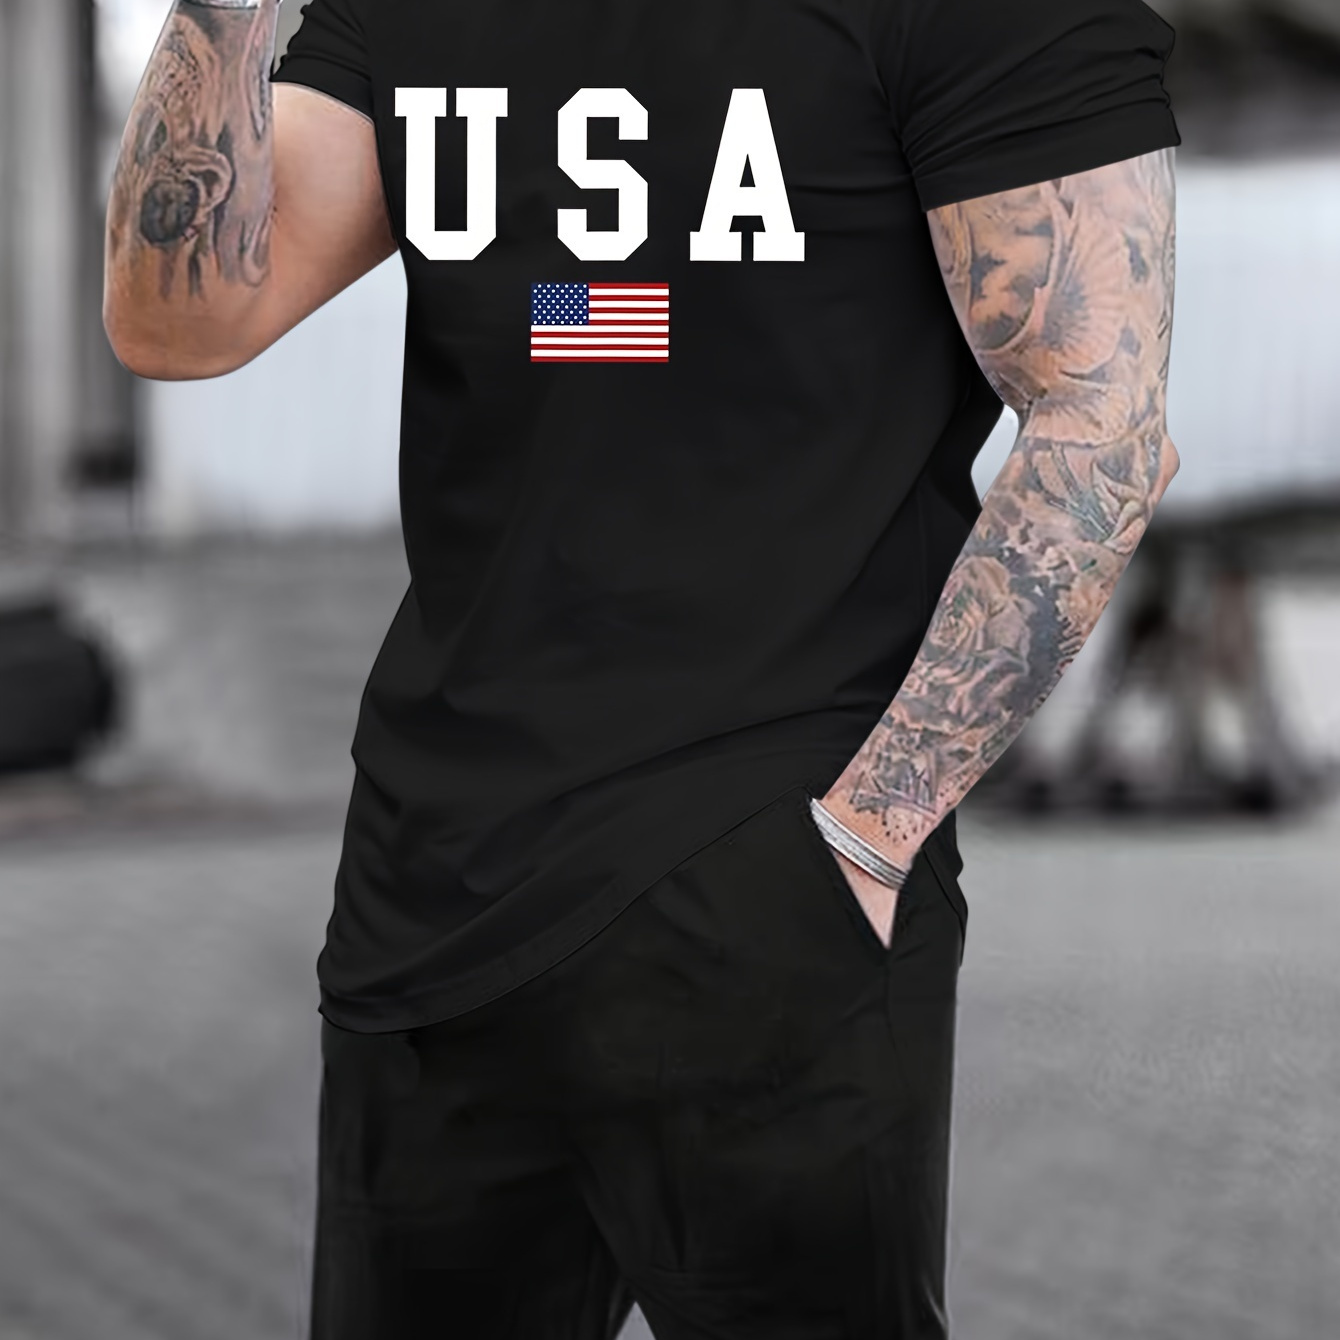 

Usa Print 2pcs Trendy Outfits For Men, Casual Crew Neck Short Sleeve T-shirt And Shorts Set For Summer, Men's Clothing Vacation Workout